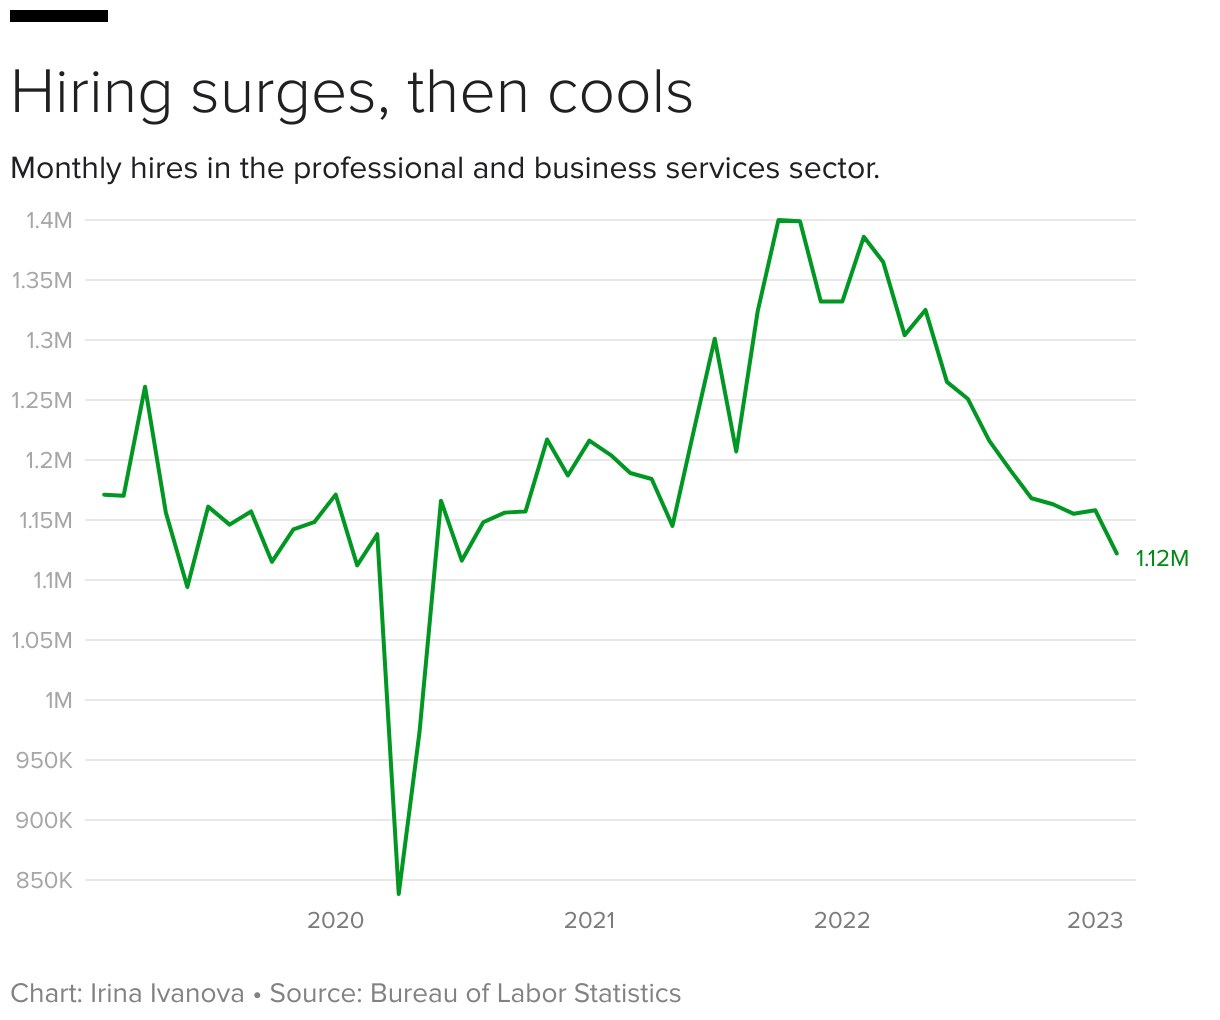 The white-collar job market is hitting a wall